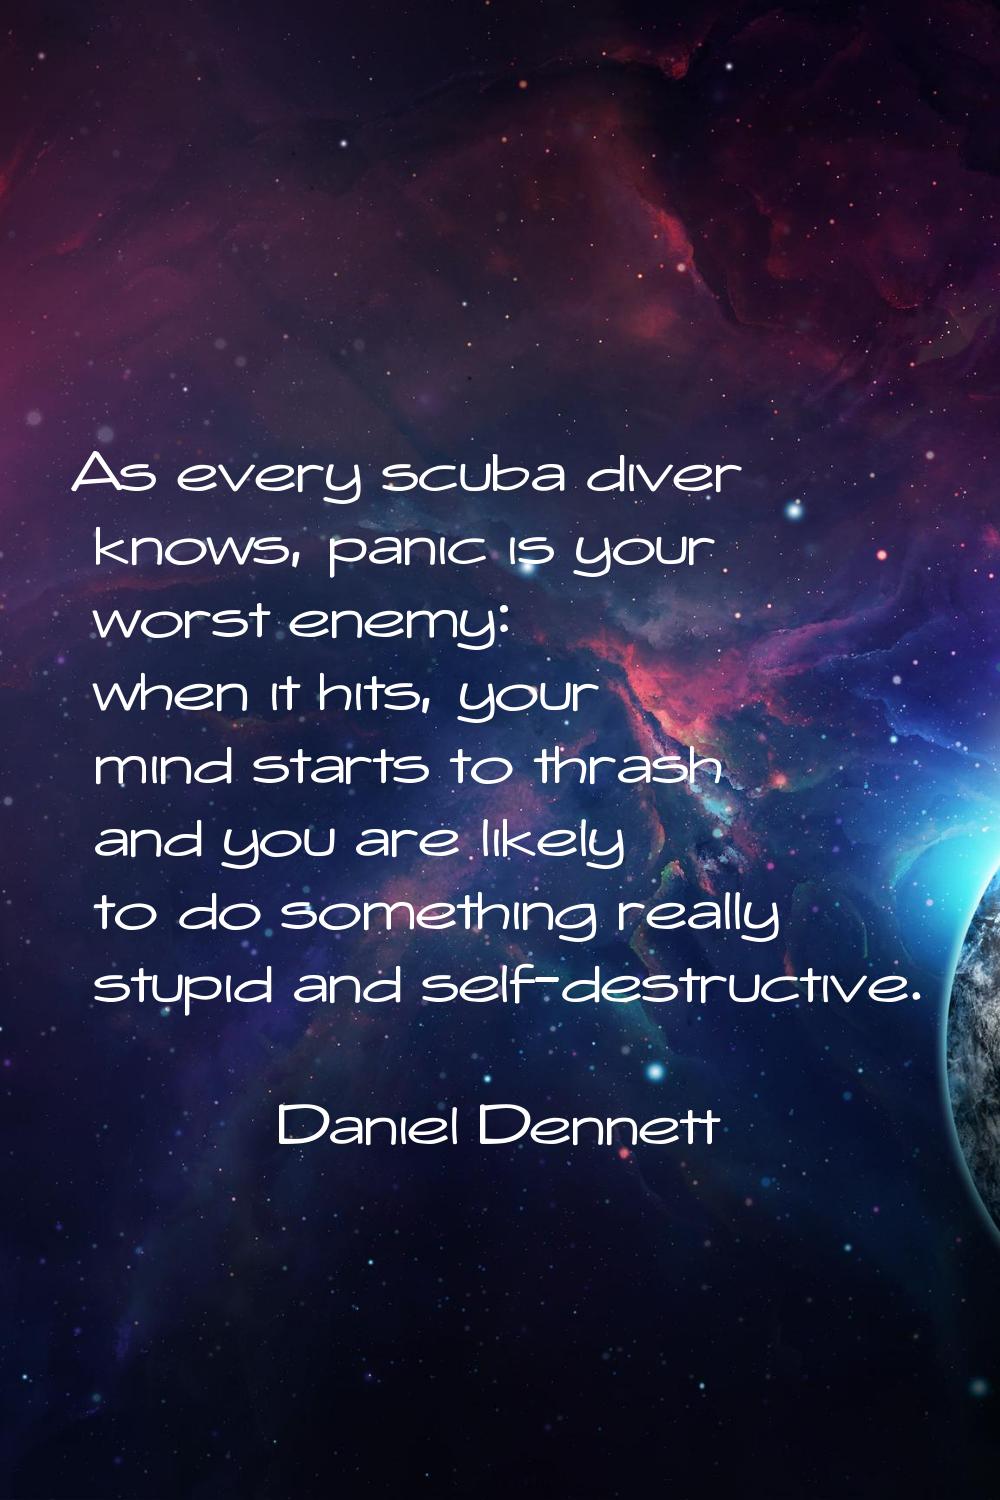 As every scuba diver knows, panic is your worst enemy: when it hits, your mind starts to thrash and